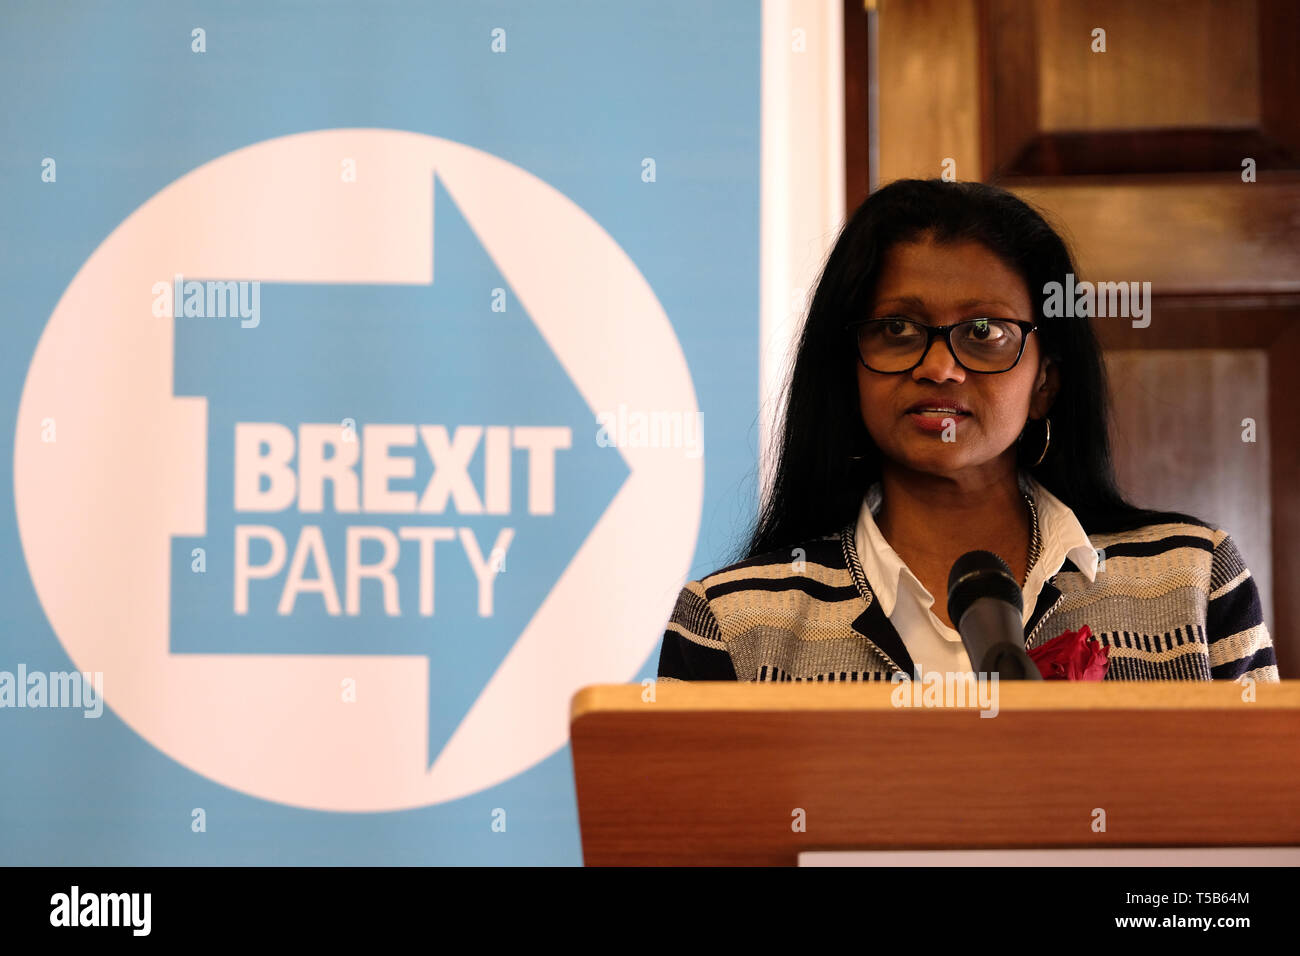 London, UK. 23rd April, 2019. The newly formed Brexit party announces  candidates for the upcoming european